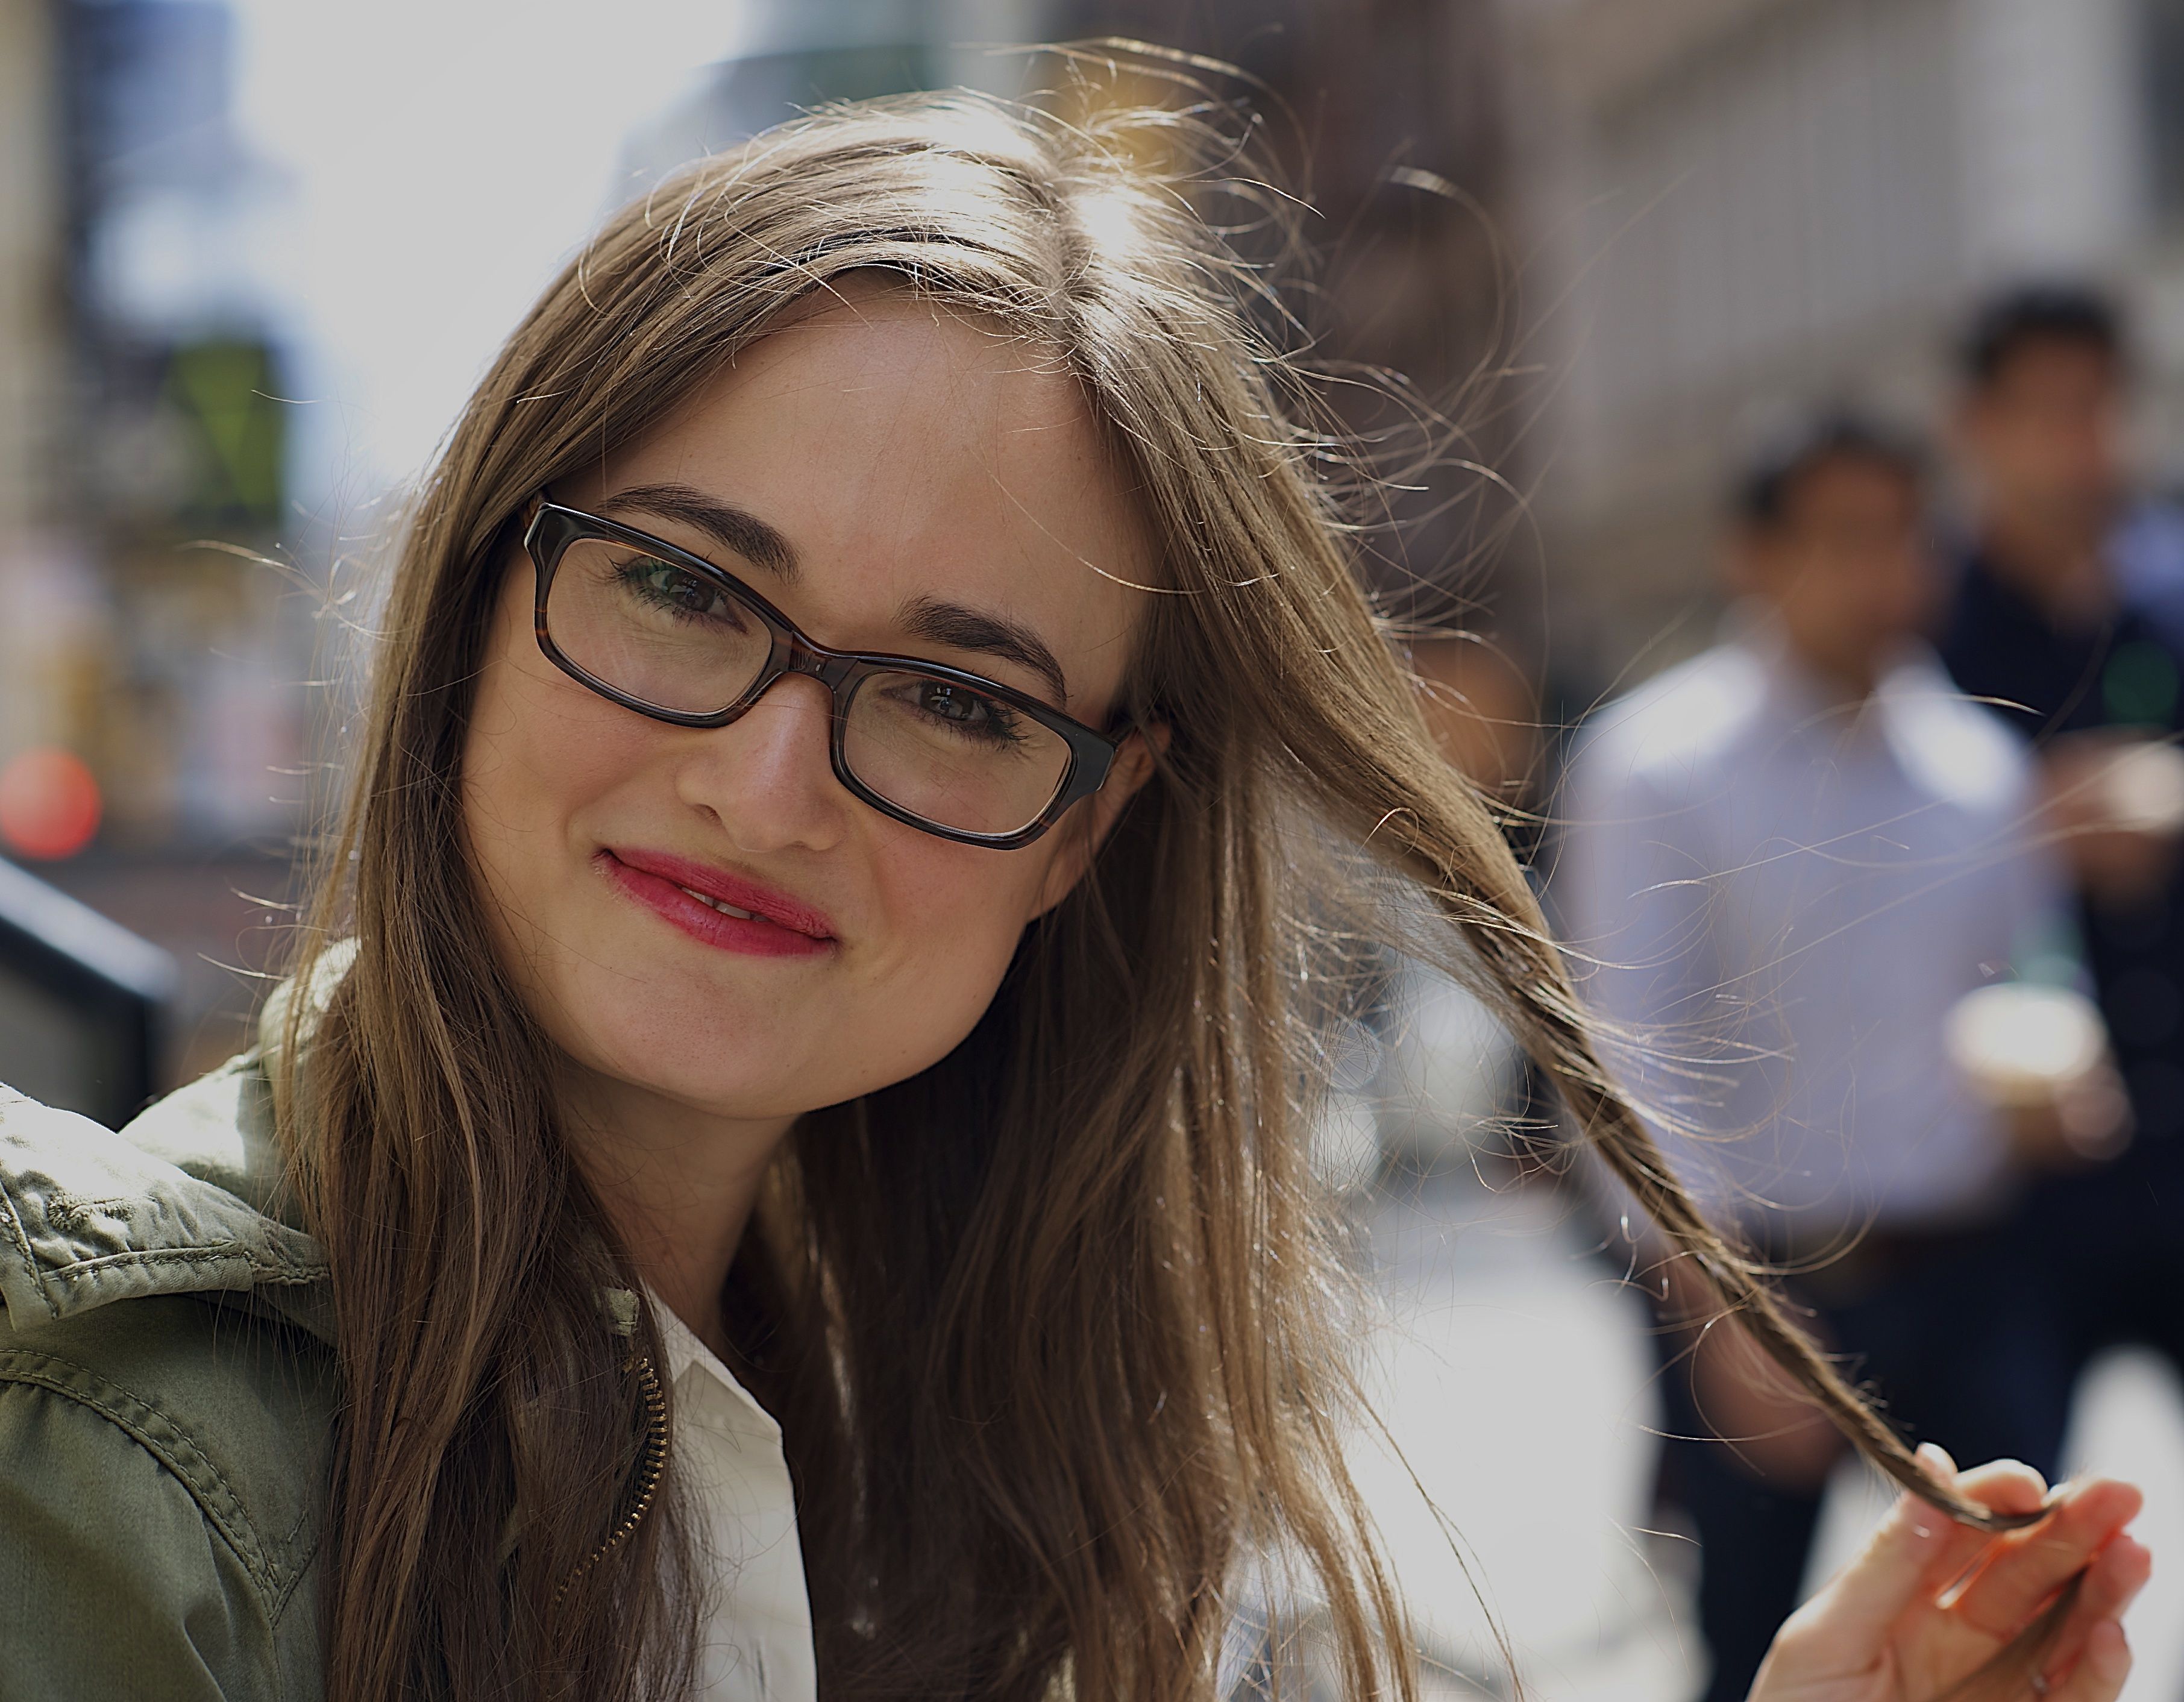 14 Ways Positive People Separate Themselves From Negative Energy